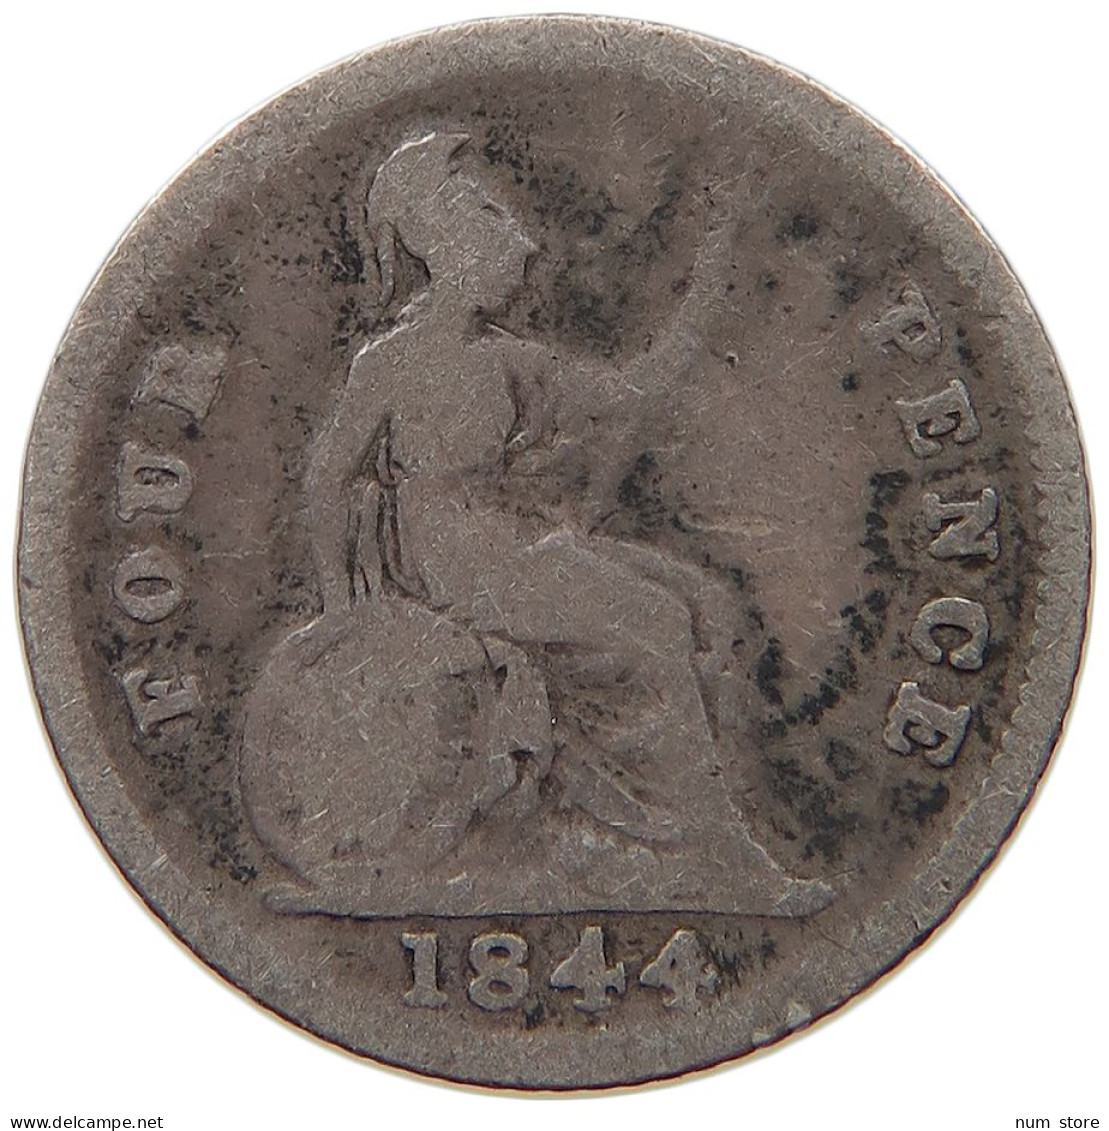 GREAT BRITAIN FOURPENCE 1844 Victoria 1837-1901 #s017 0125 - G. 4 Pence/ Groat